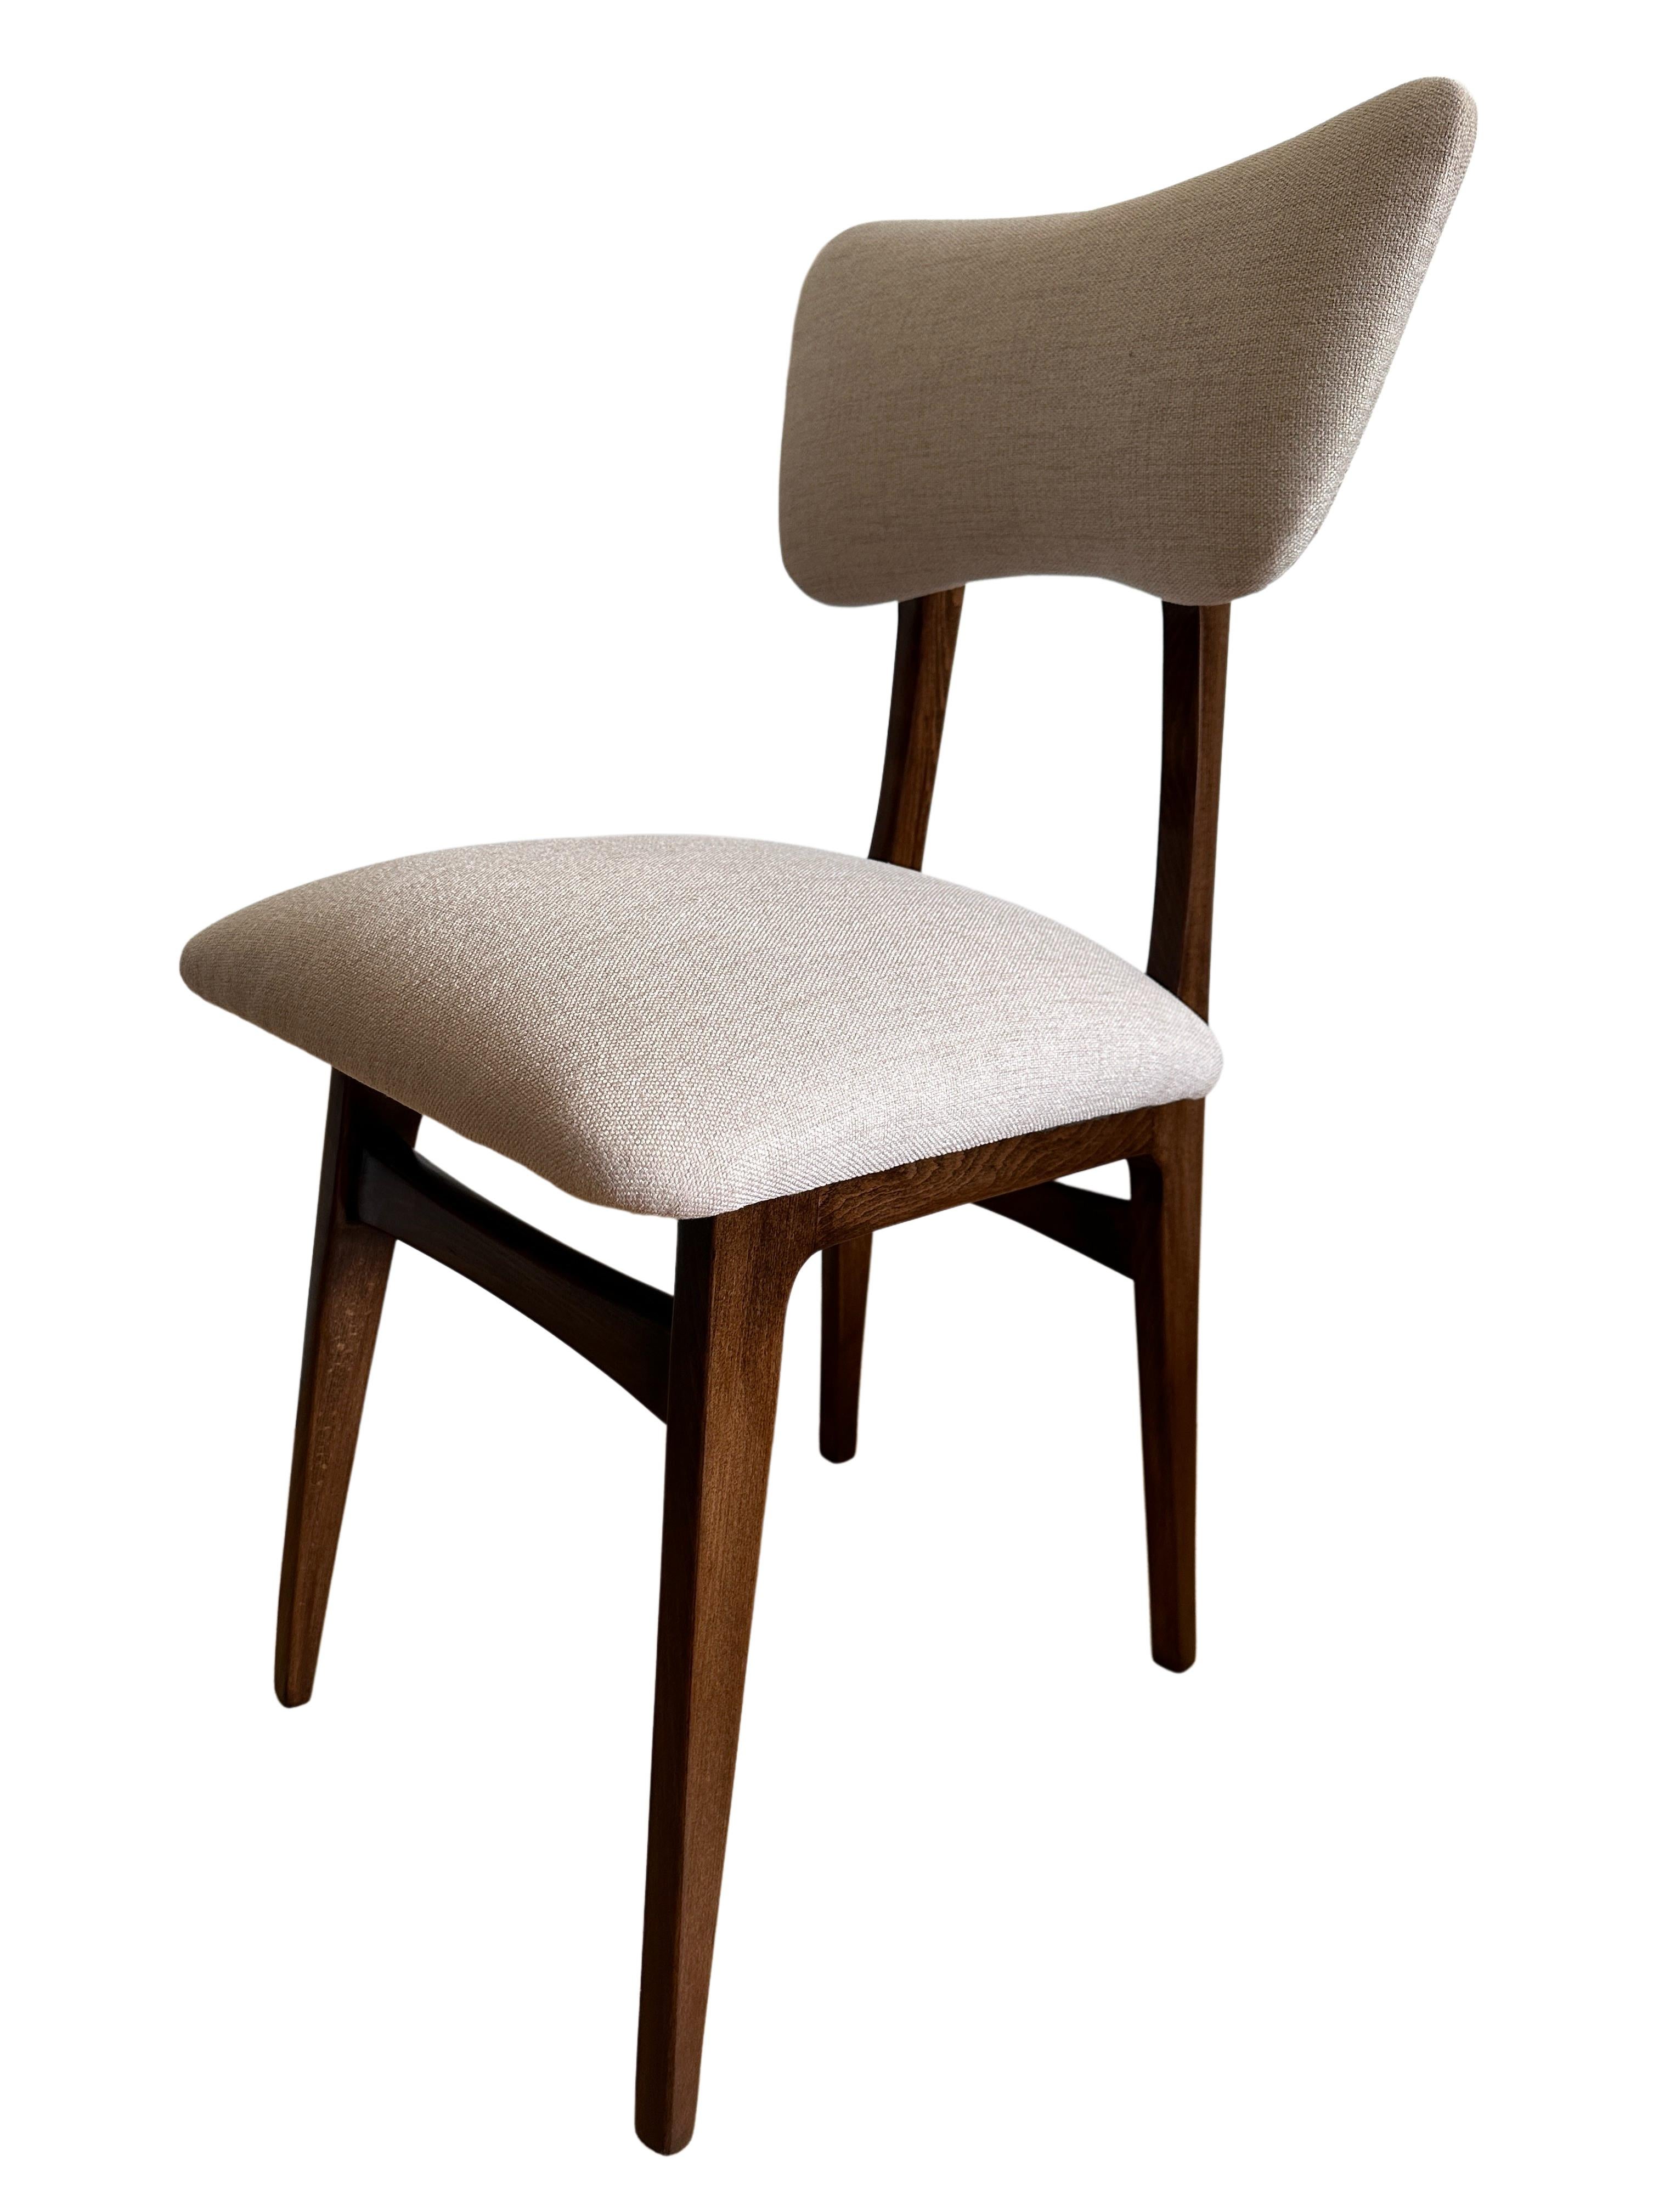 Mid-Century Modern Midcentury Dining Chair in Beige, Europe, 1960s For Sale